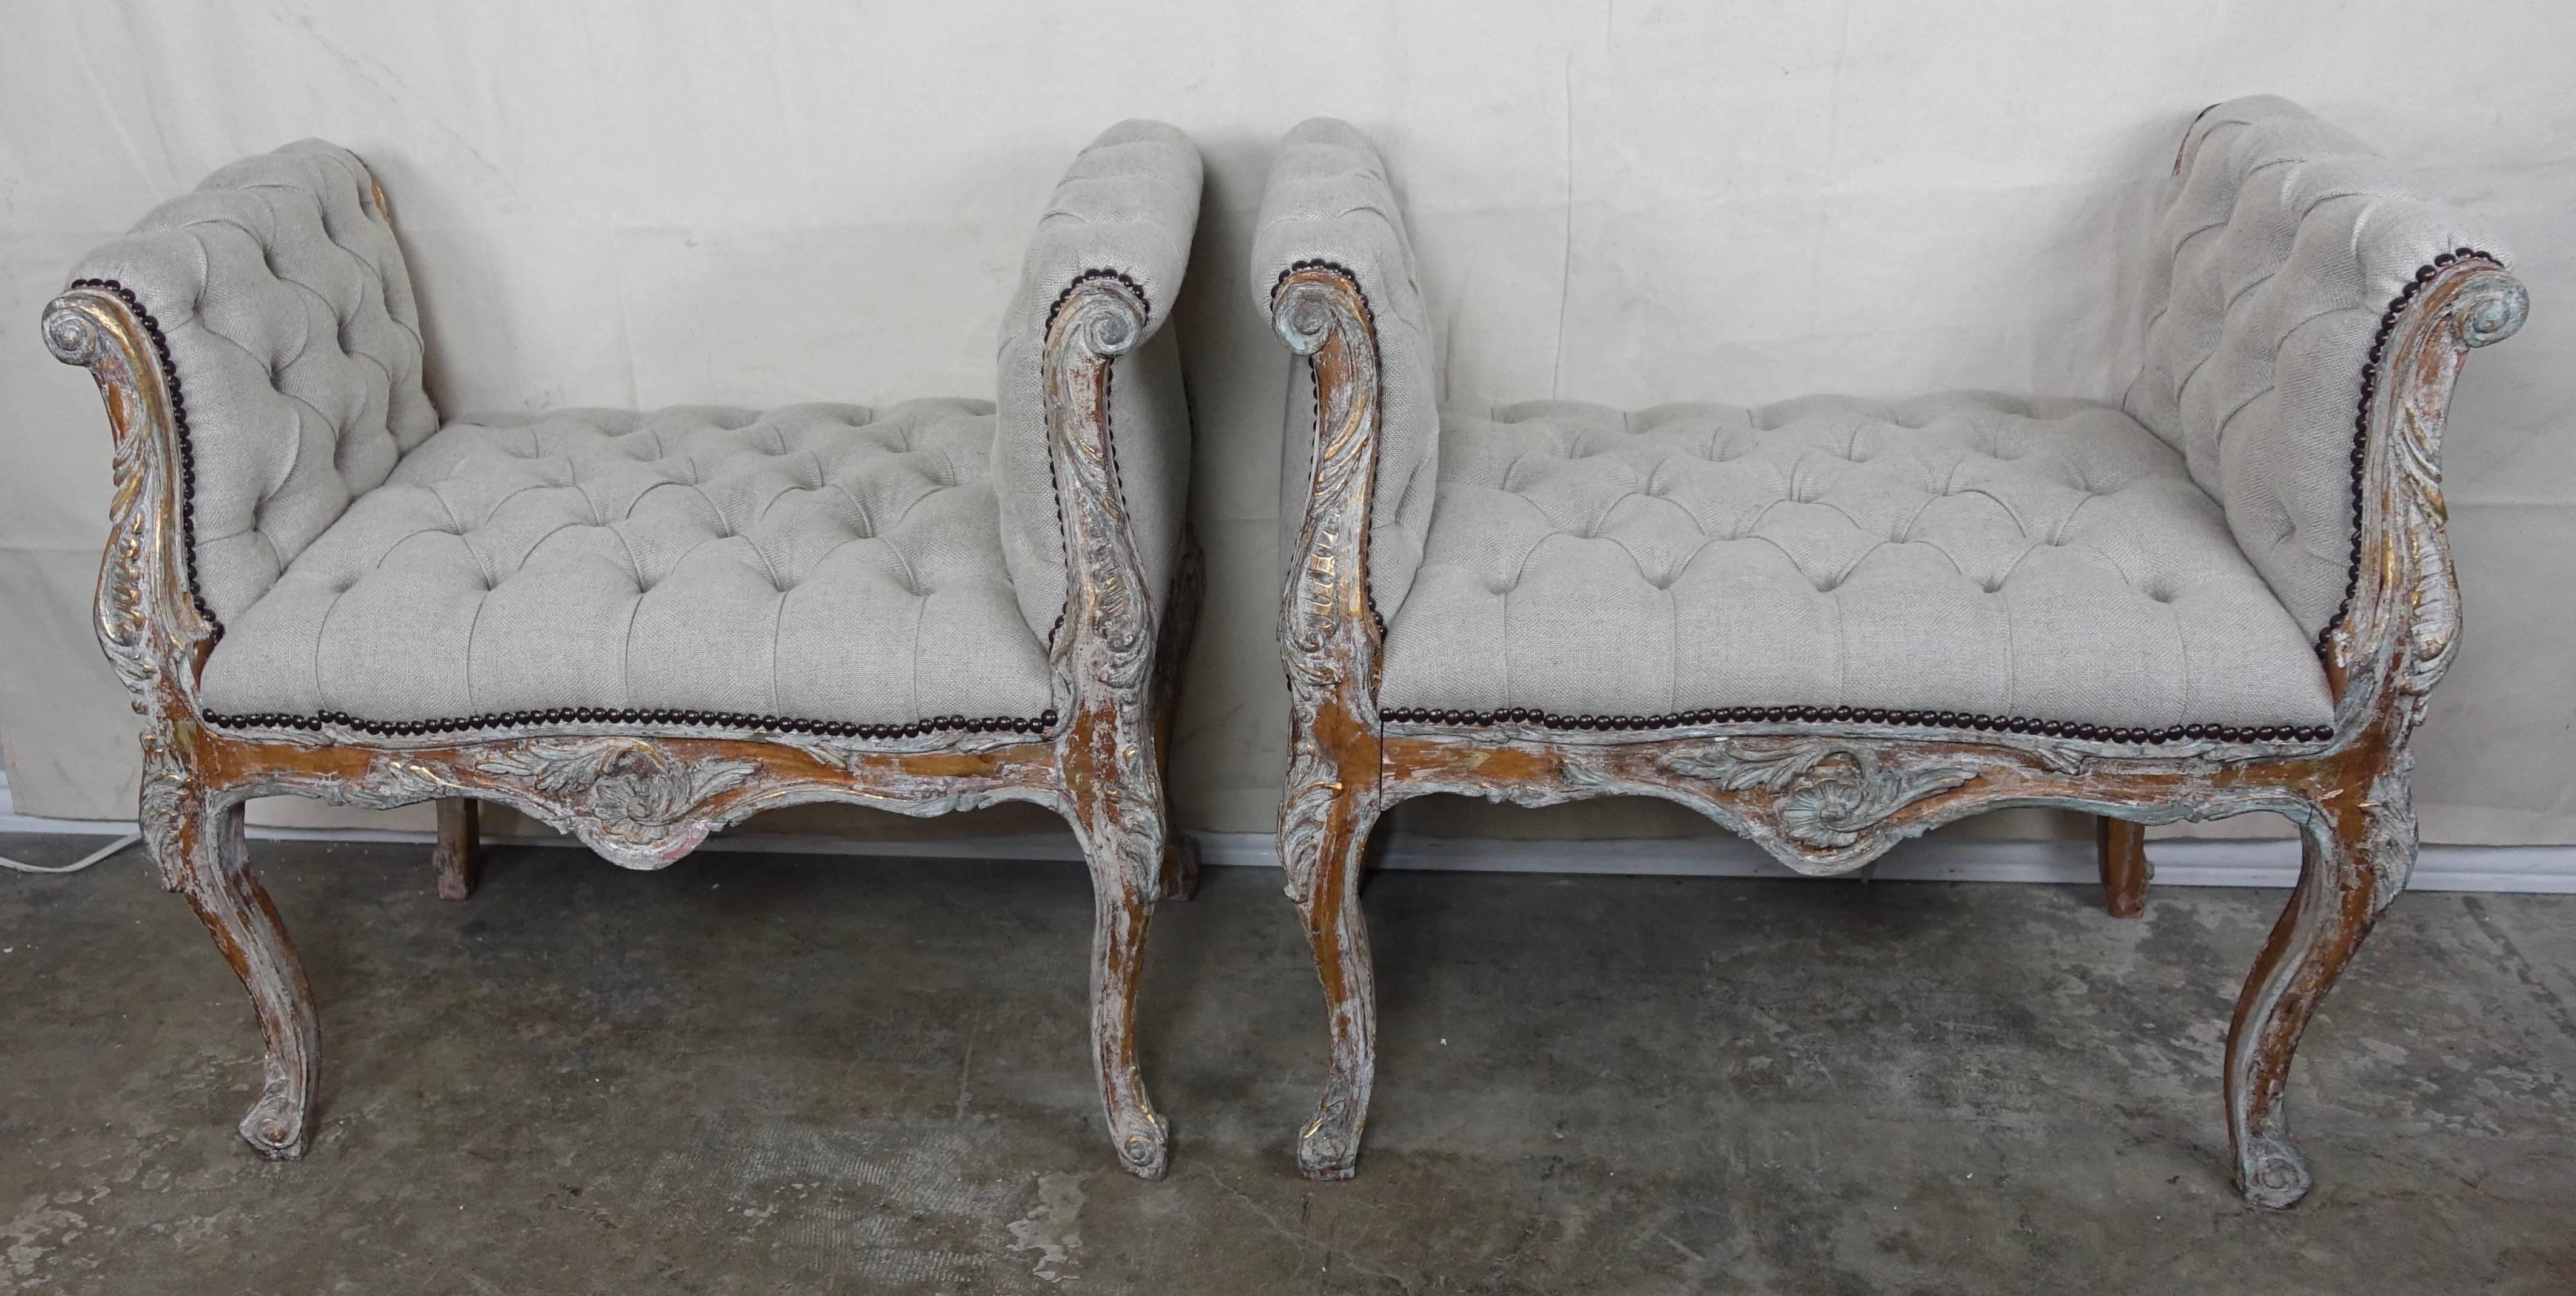 Pair of French Louis XV style benches in a painted and parcel-gilt worn finish. The benches are newly upholstered in oatmeal colored tufted Belgium linen with nailhead trim detail.